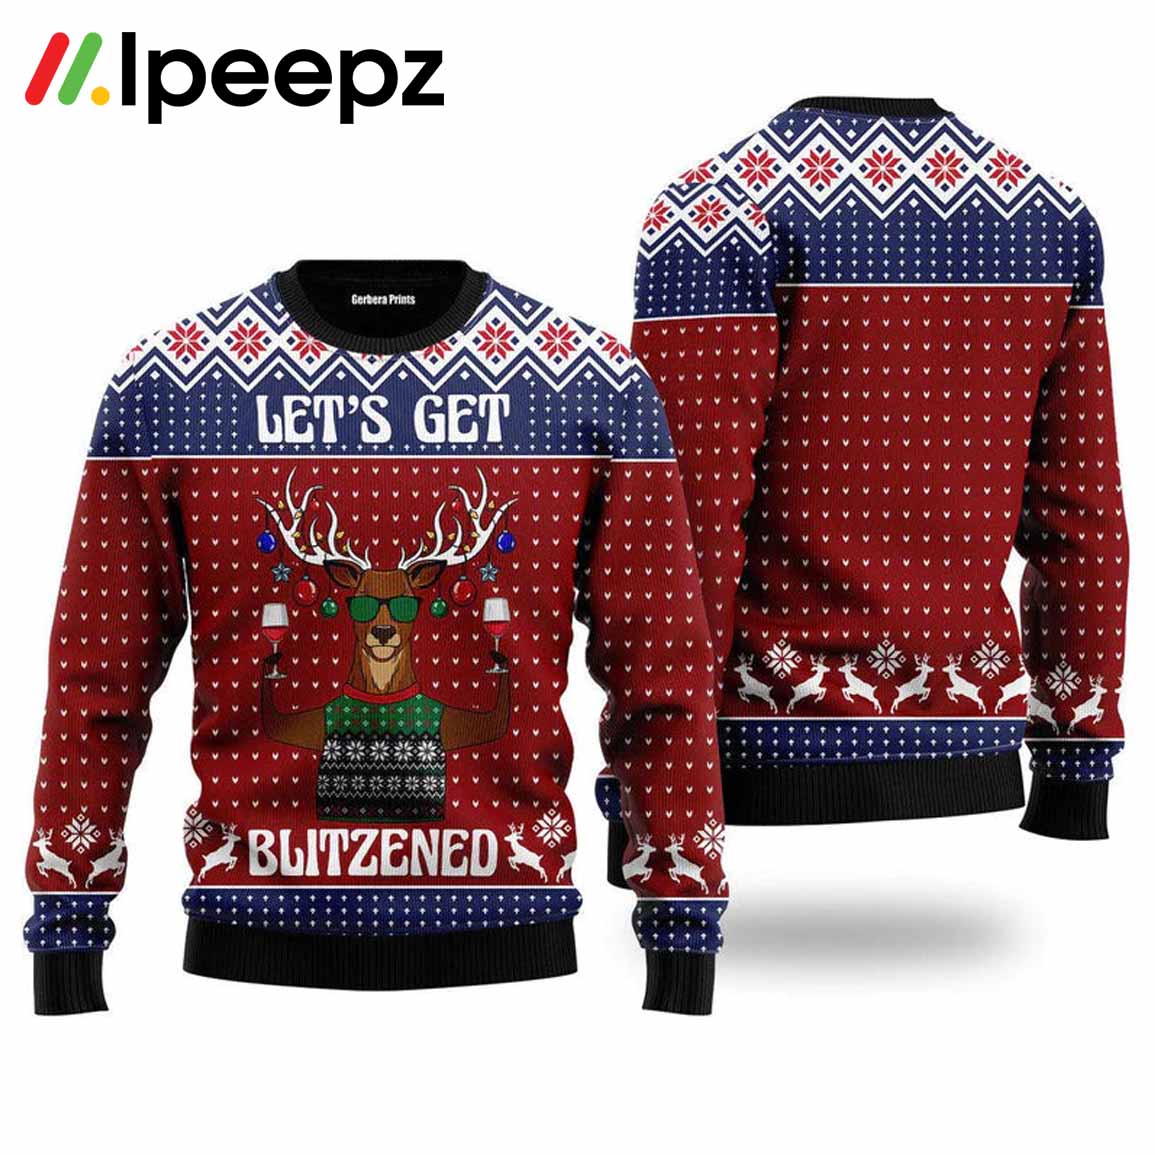 Let’s Get Slouchy Ugly Christmas Sweater